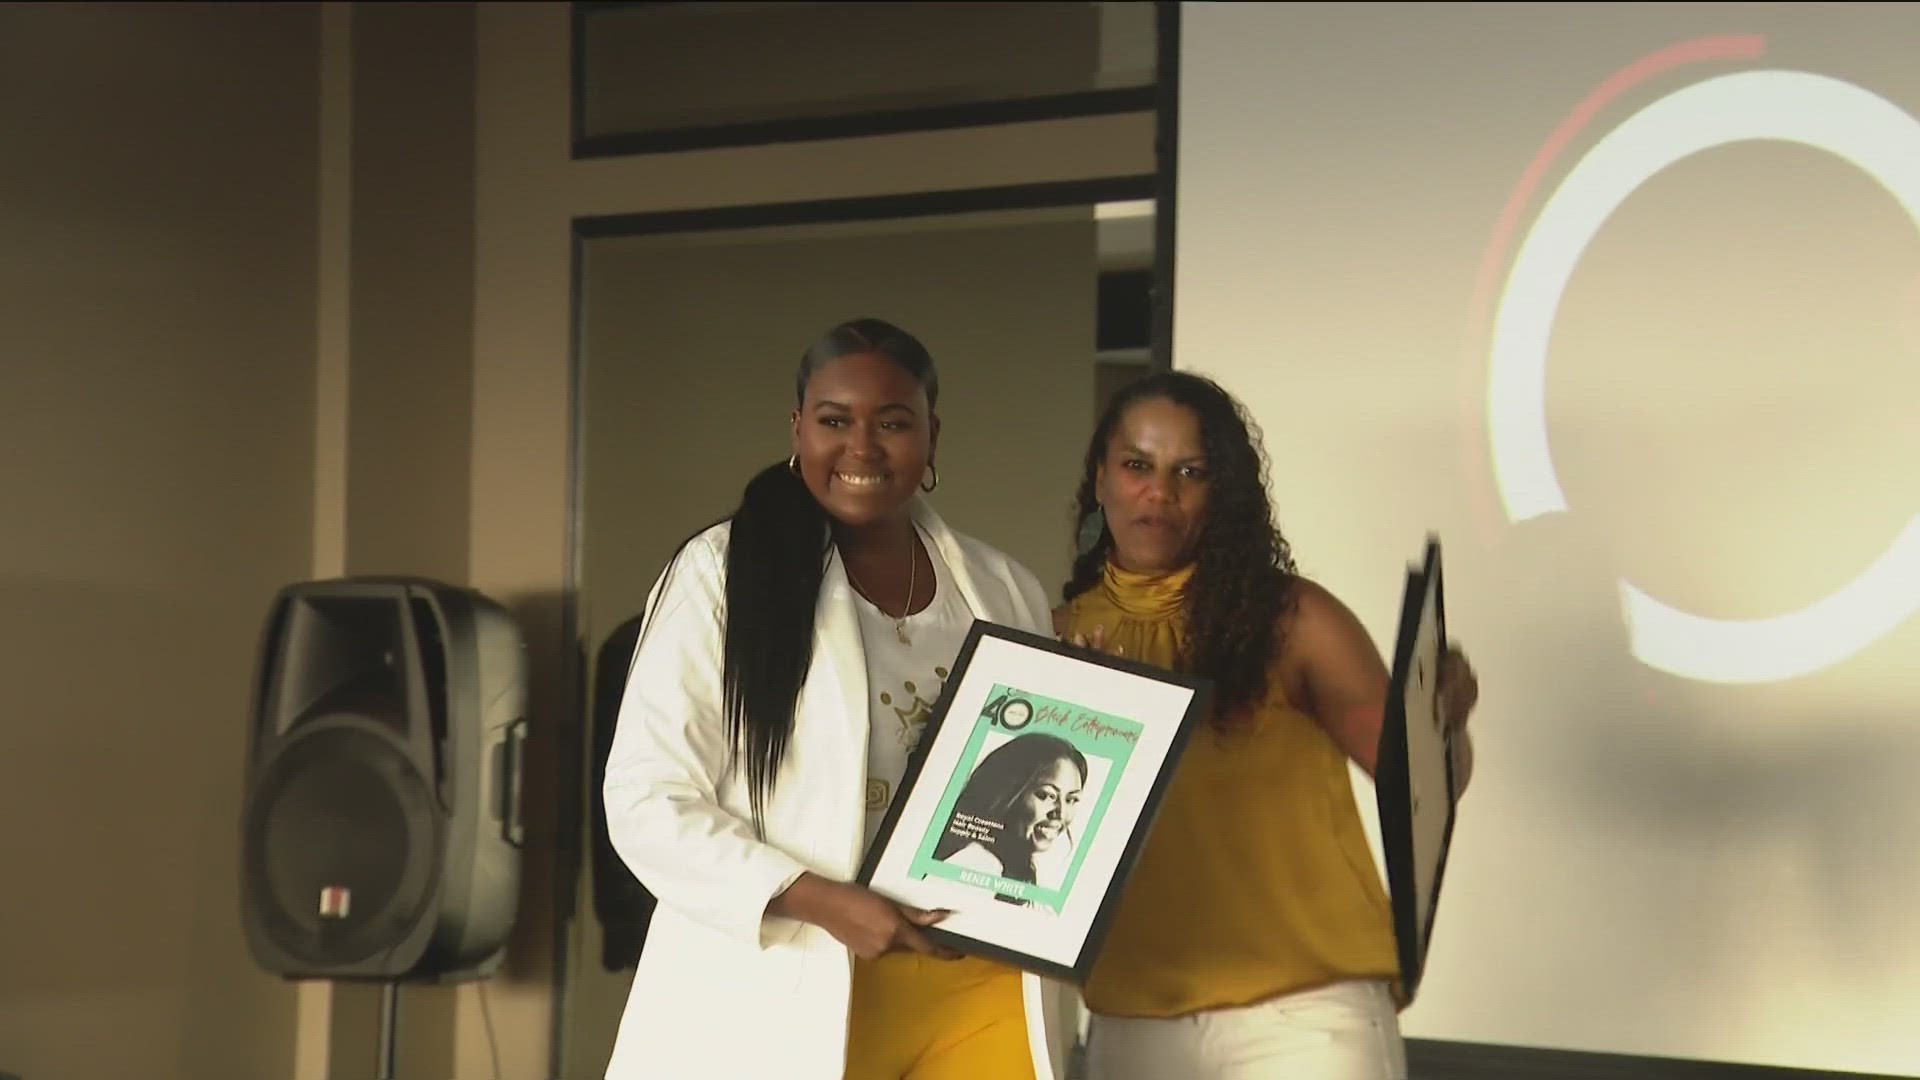 San Diego's top 40 Black business owners under 40 were recognized for their contributions to the county.